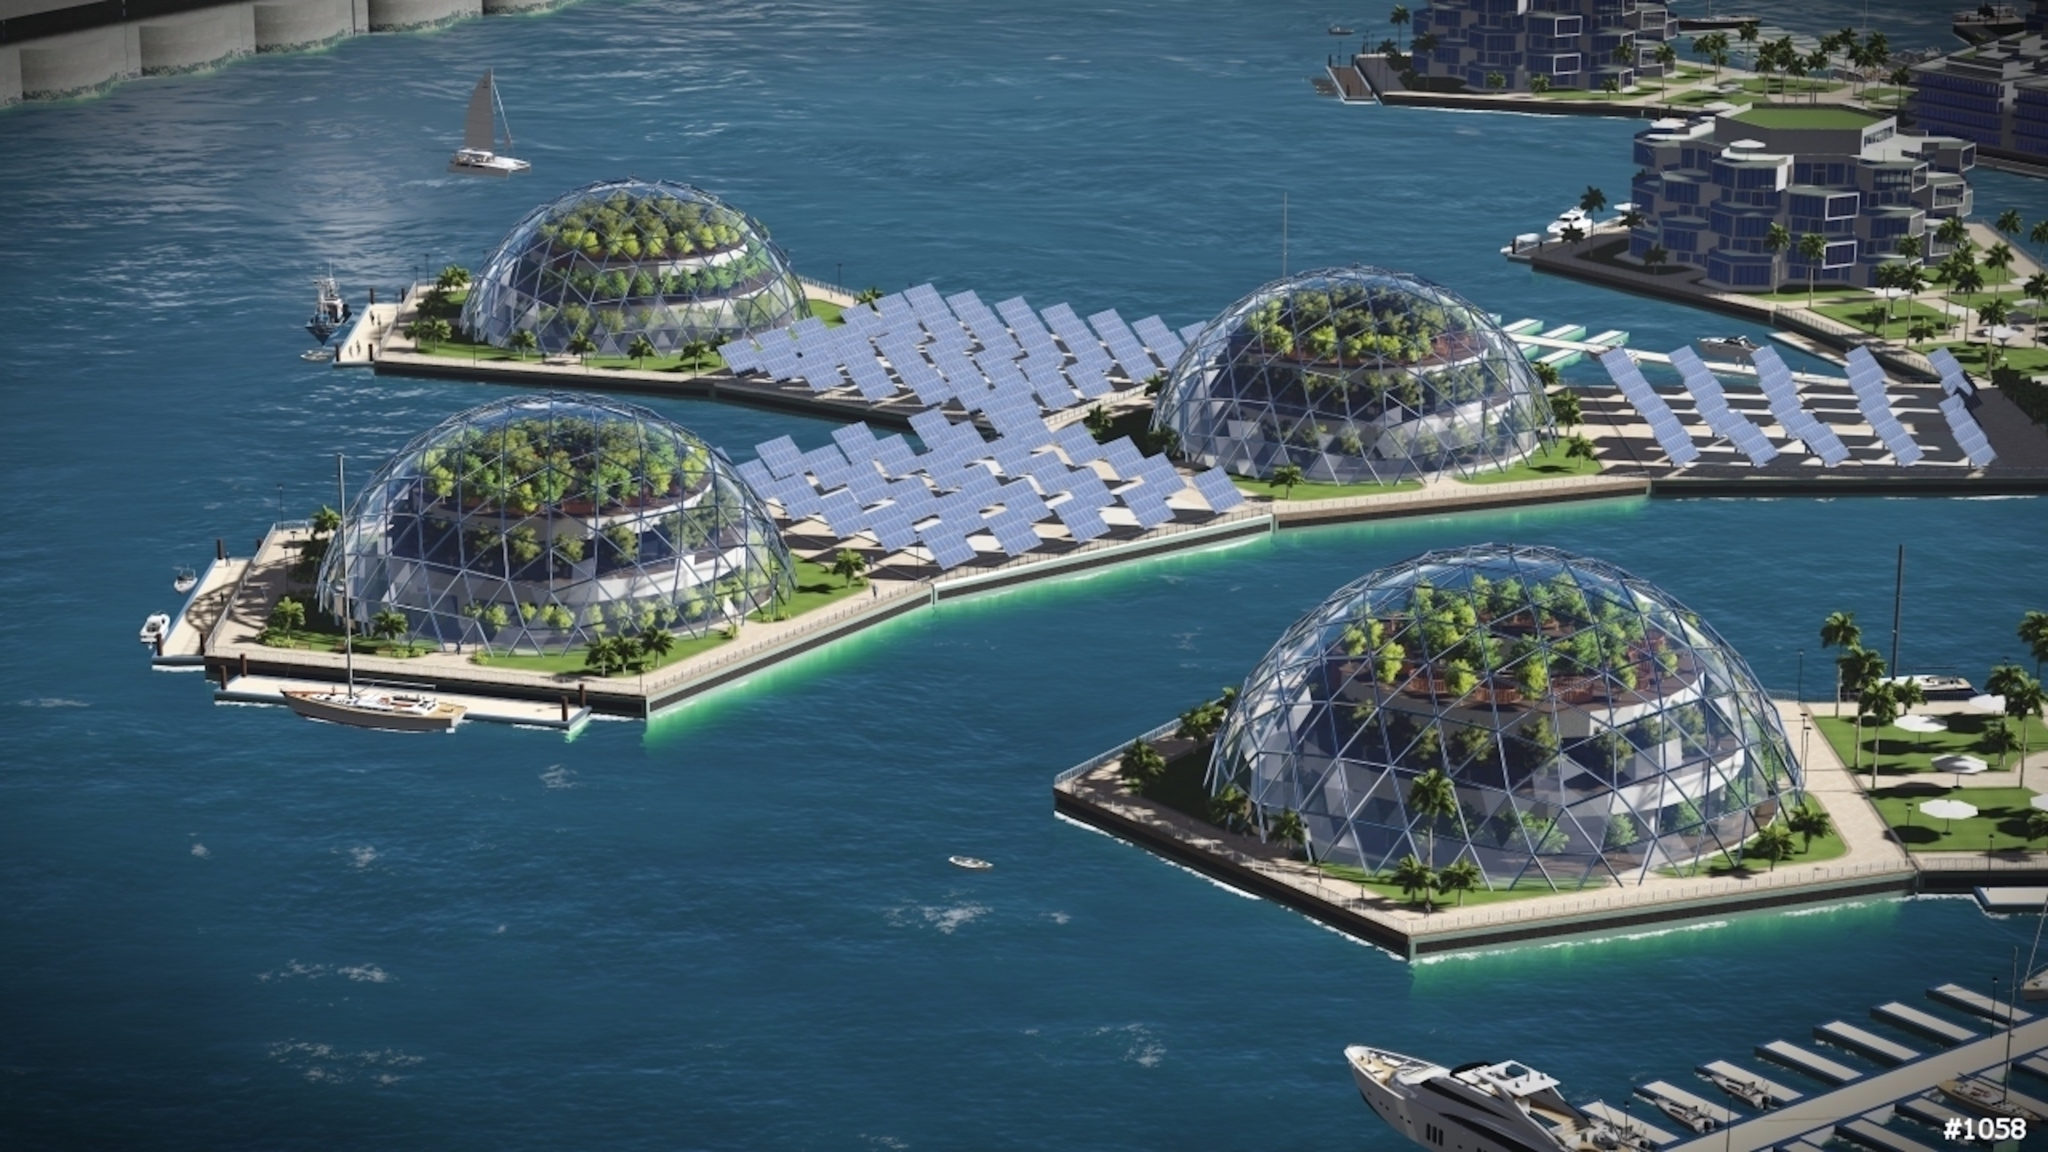 Artisanopolis-artist-concept-for-The-Seasteading-Institute-by-Gabriel-Scheare-Luke-Lourdes-Crowley-and-Patrick-White-High-Res-copy-2048x1152.jpg